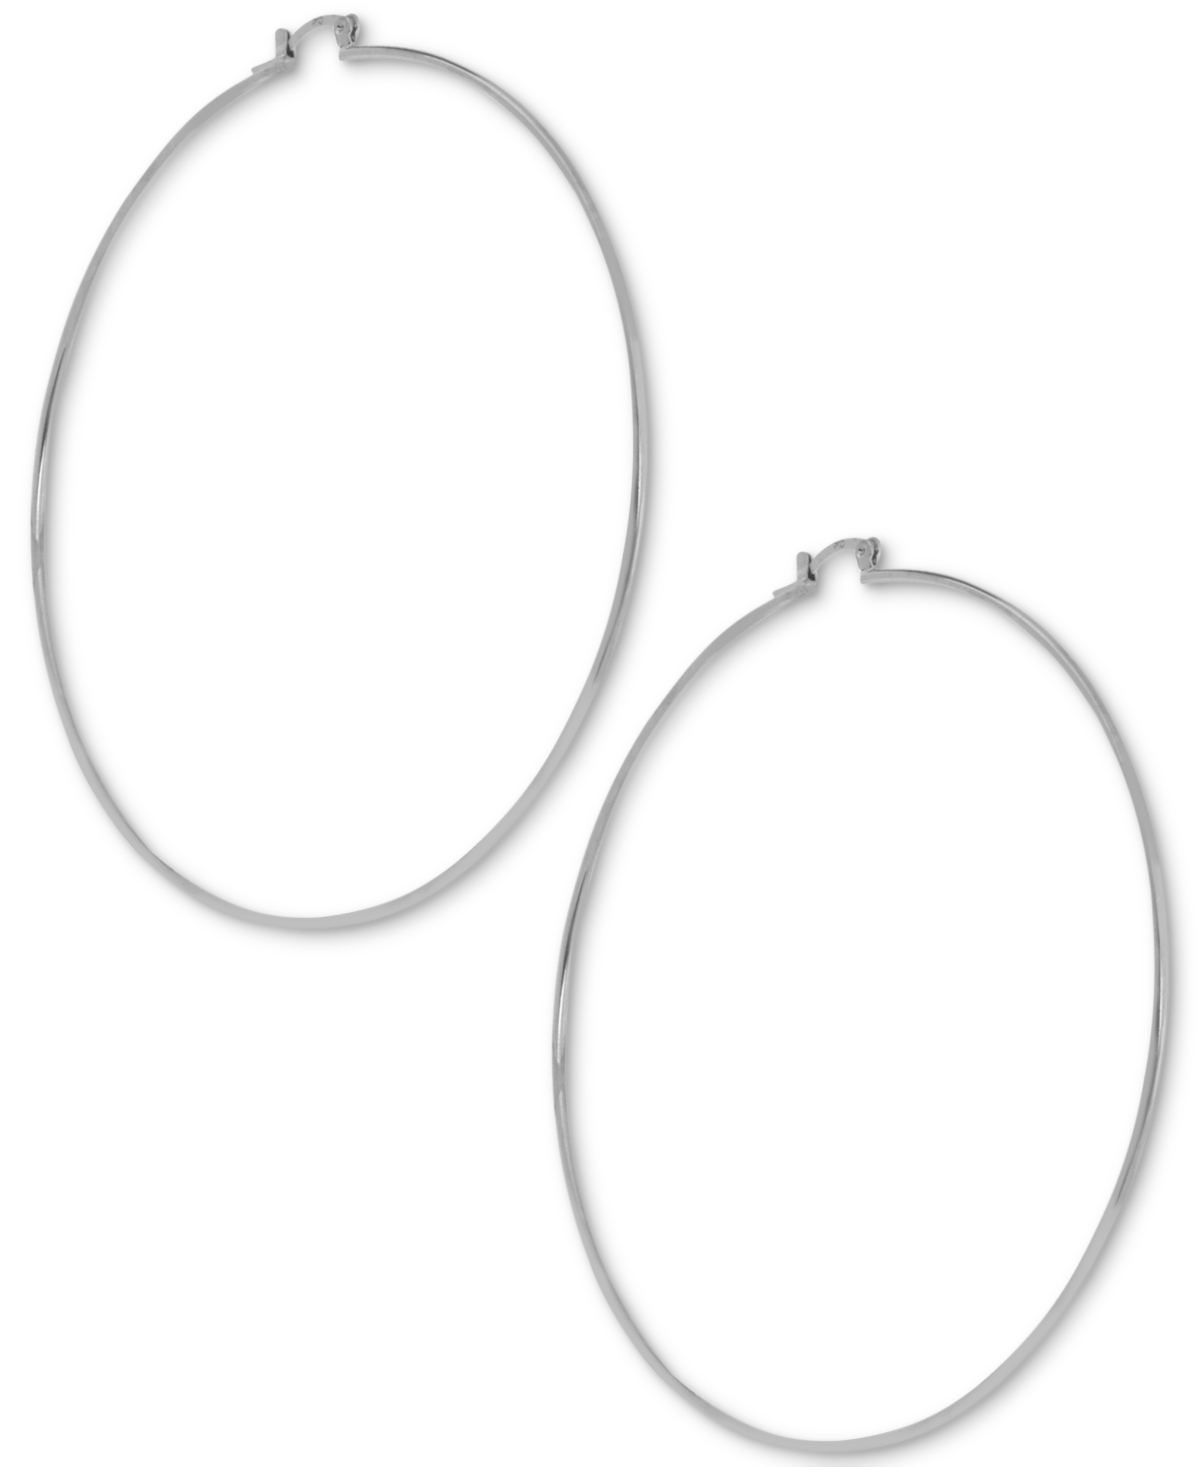 And Now This Large Wire Extra Large Hoop in Silver Plate Earrings - Gold